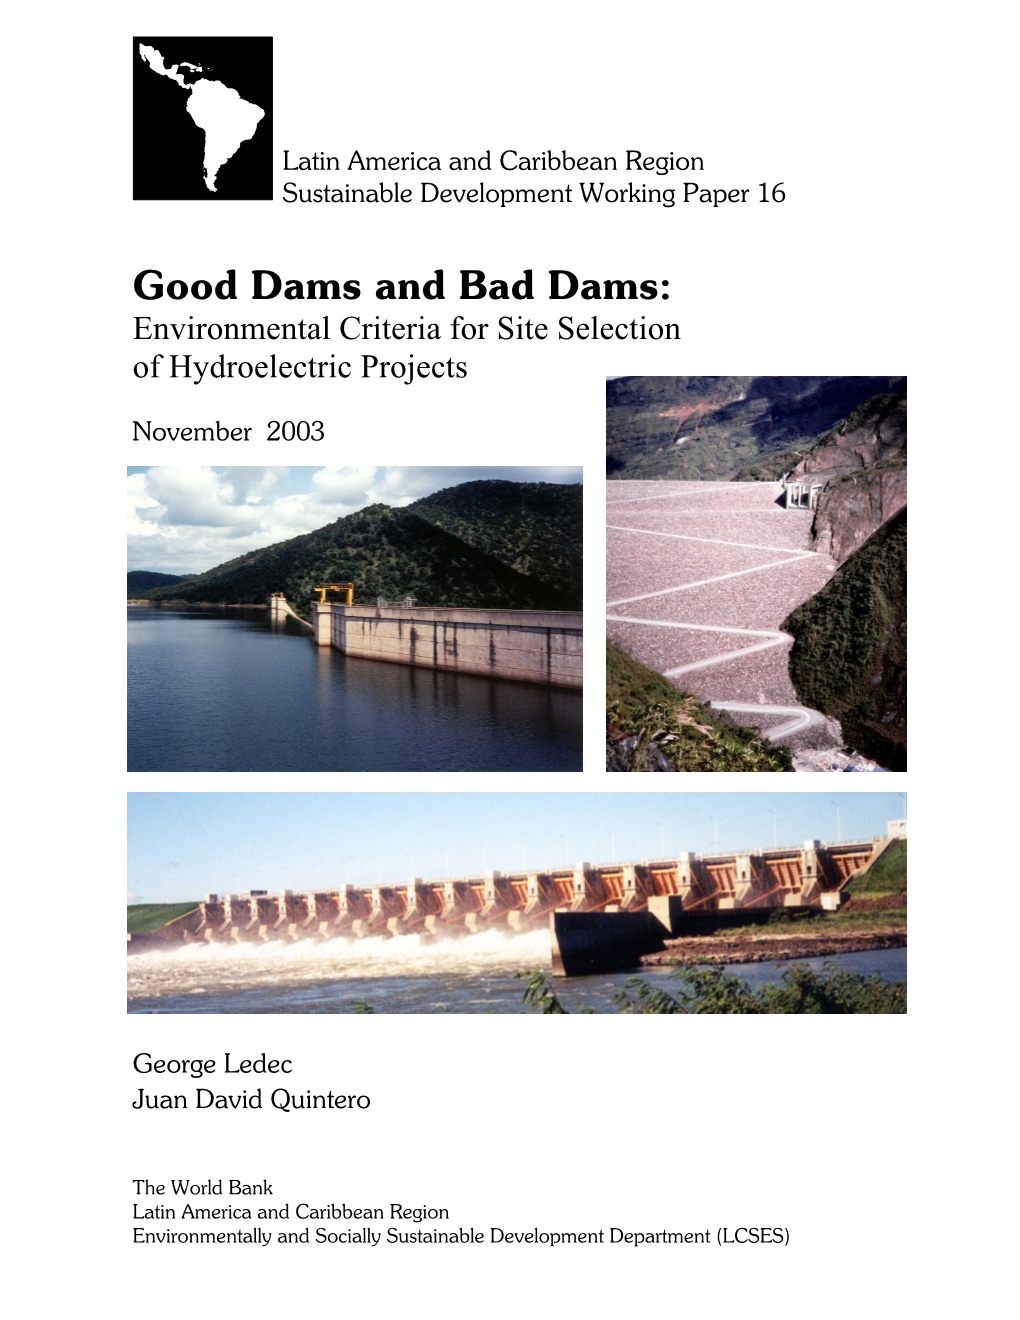 Good Dams and Bad Dams: Environmental Criteria for Site Selection of Hydroelectric Projects